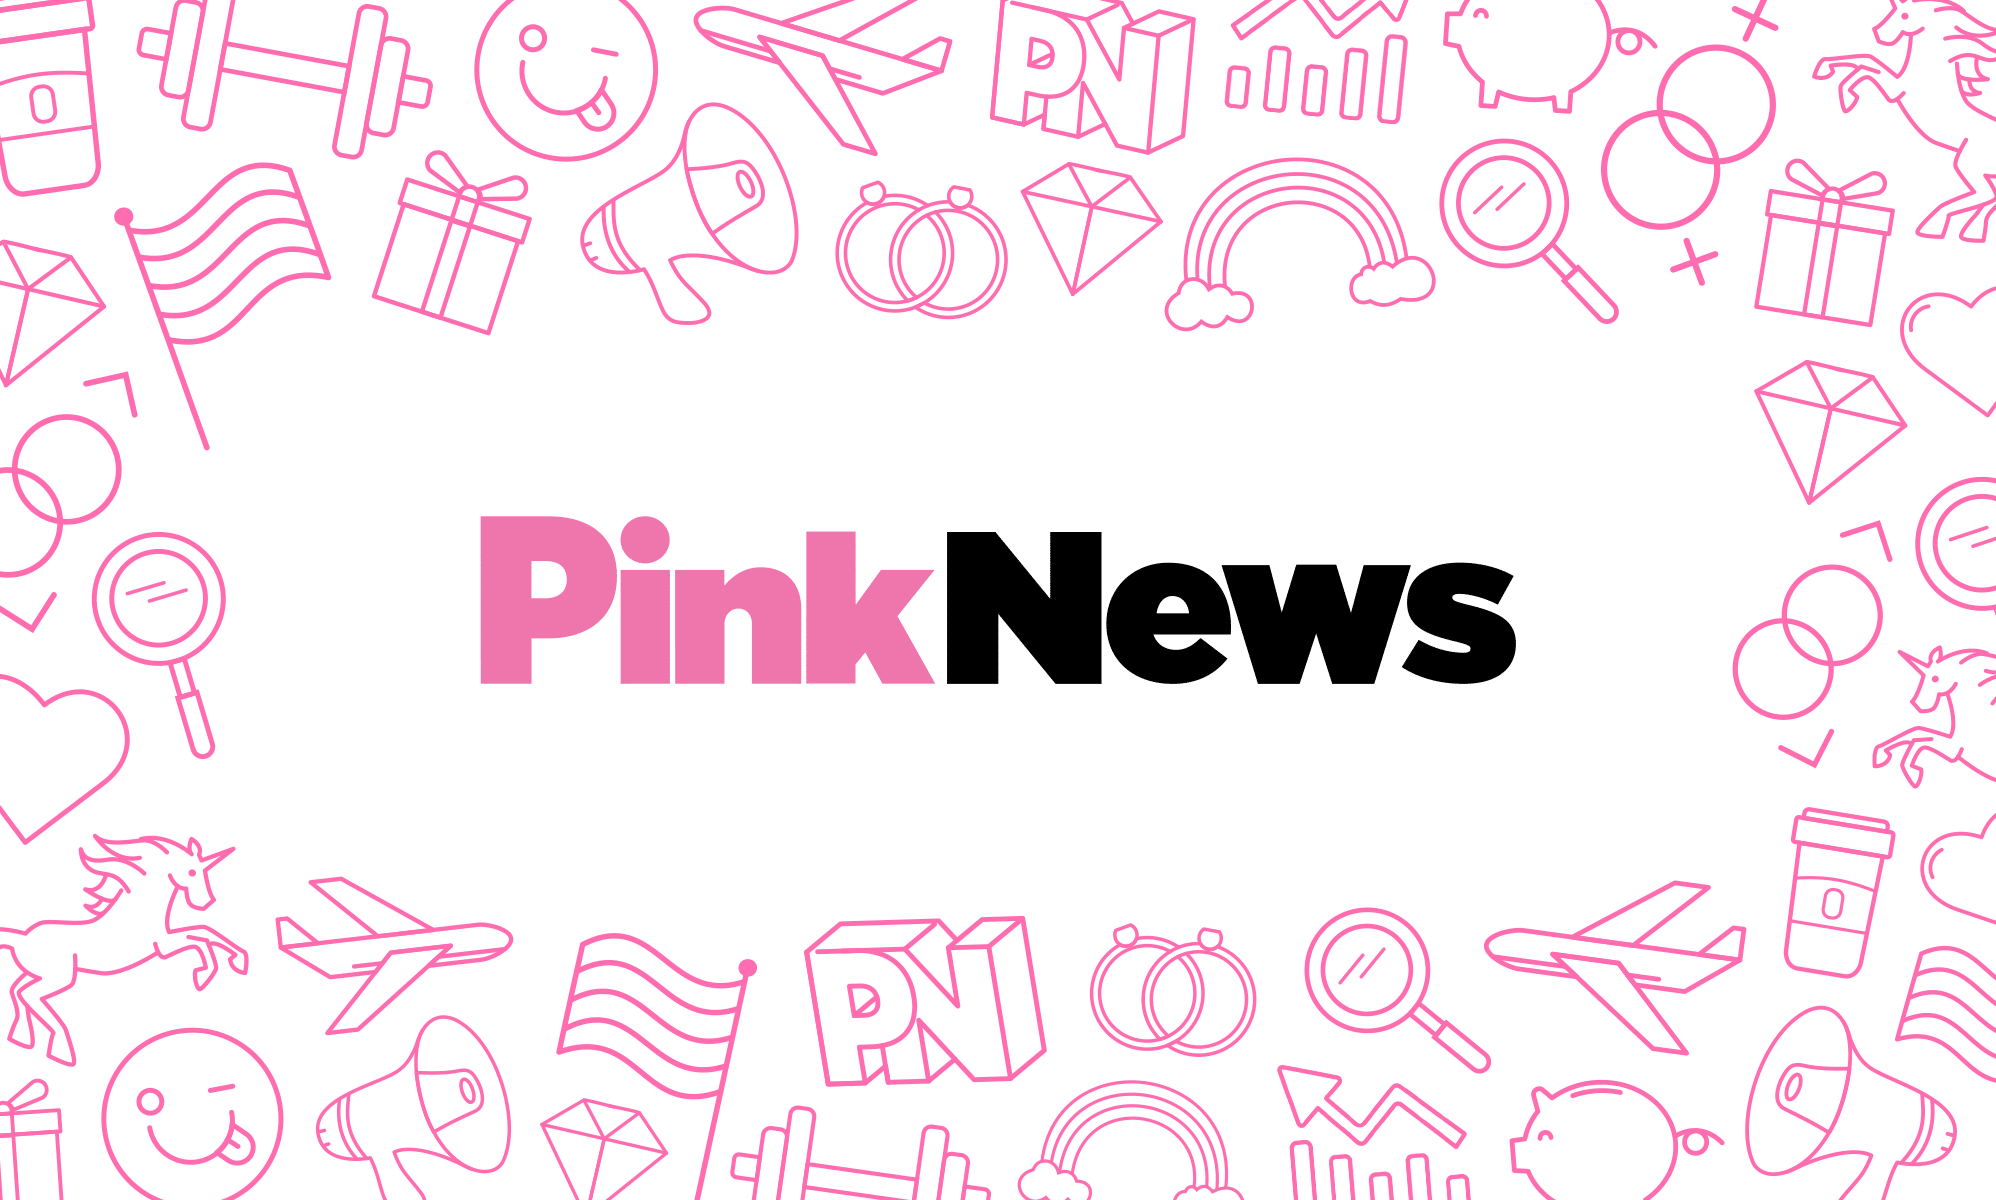 The nominees for the PinkNews Third Sector Equality Award are&#8230;